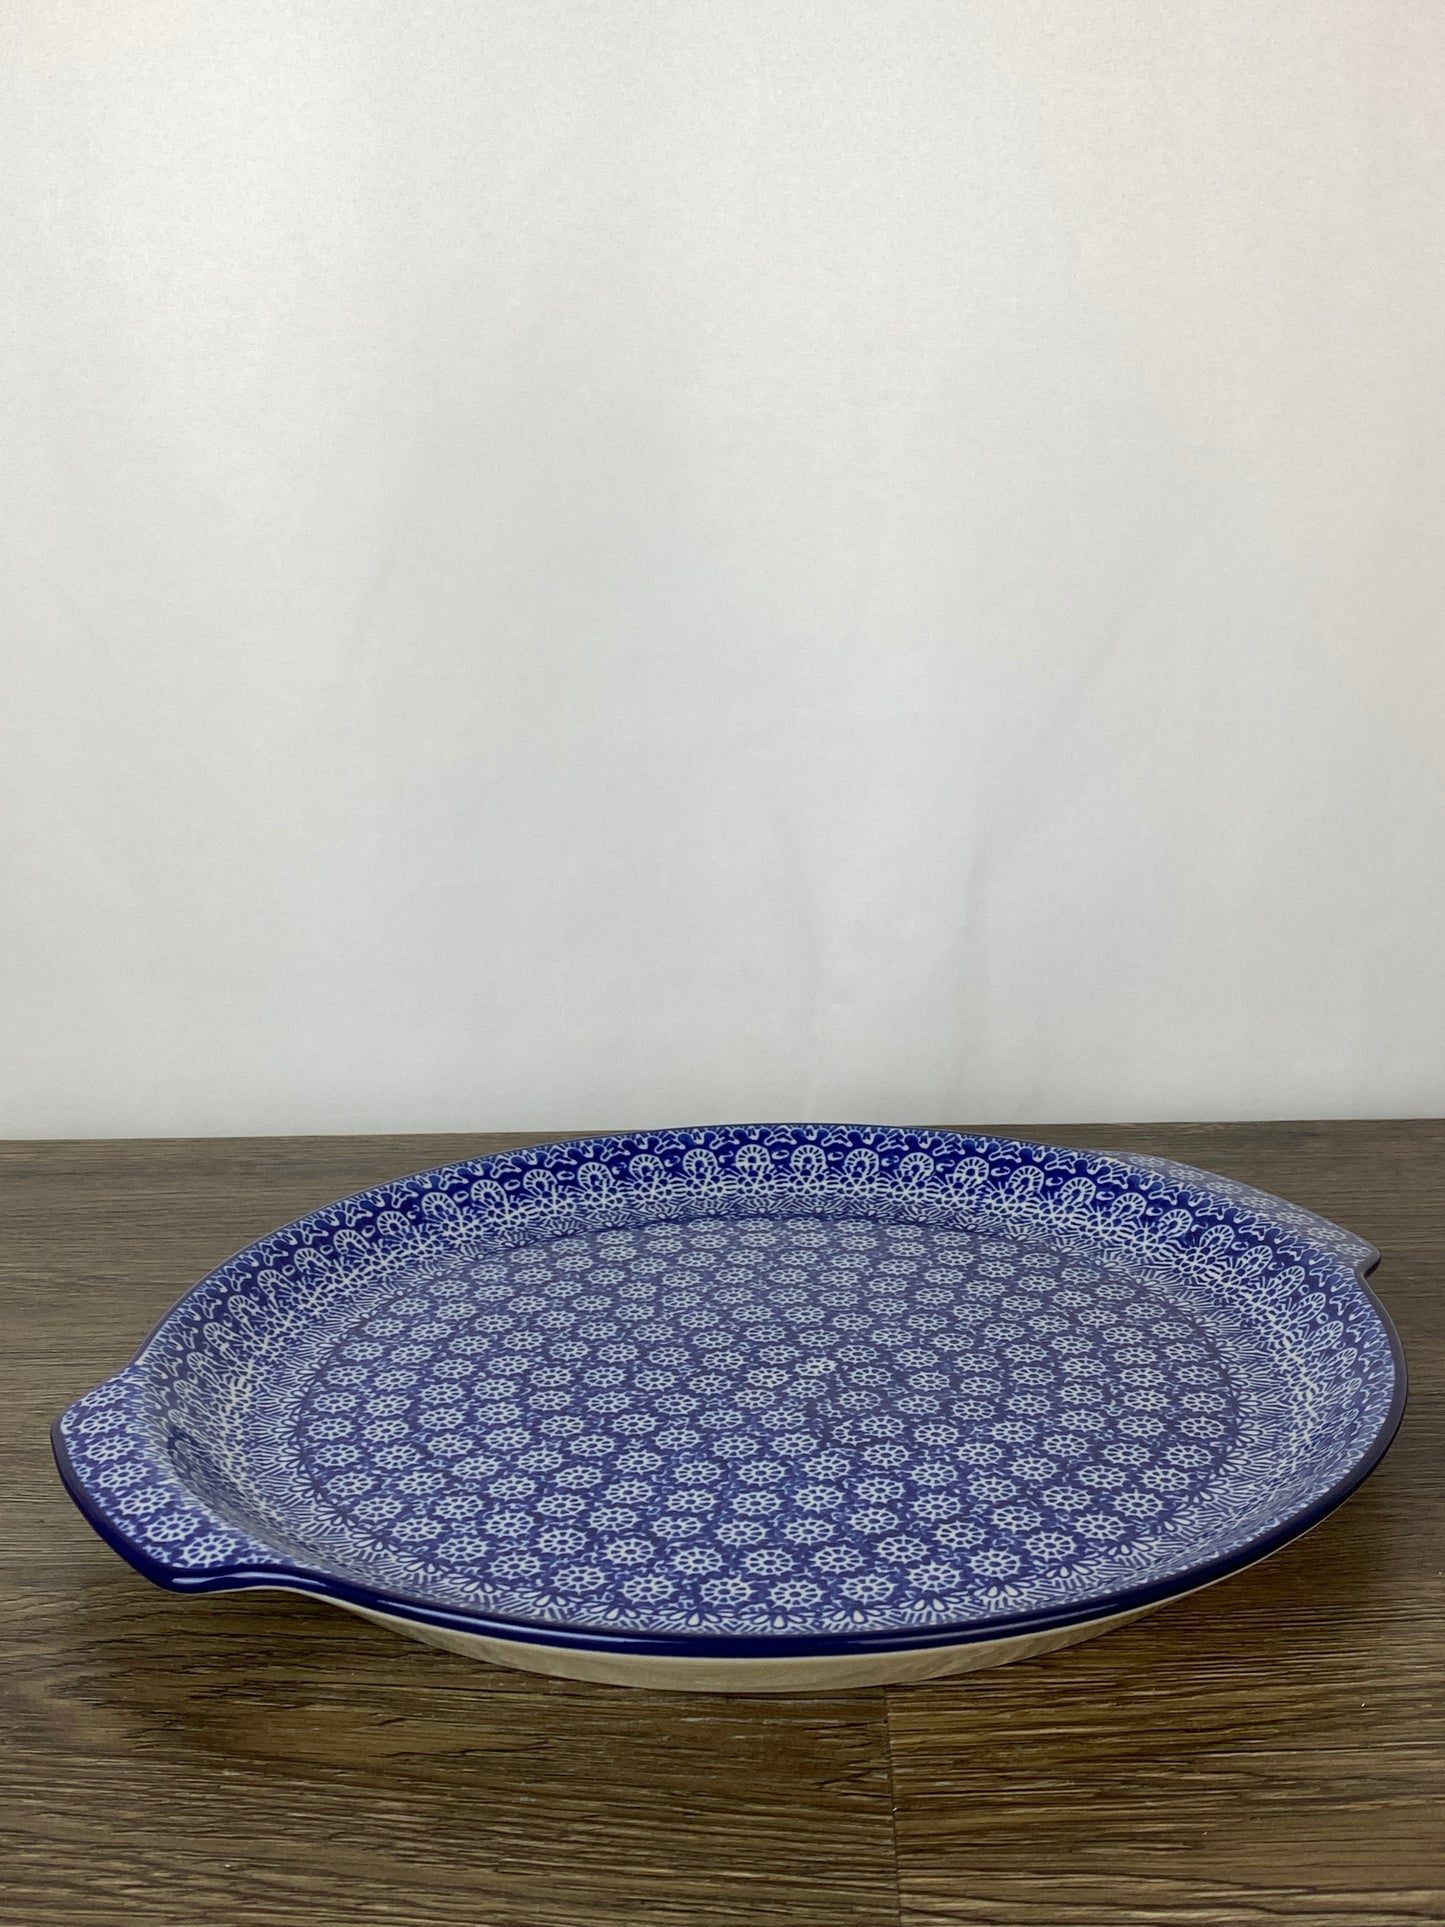 SALE Round Platter With Handles / Pizza Stone - Shape 151 - Pattern 884